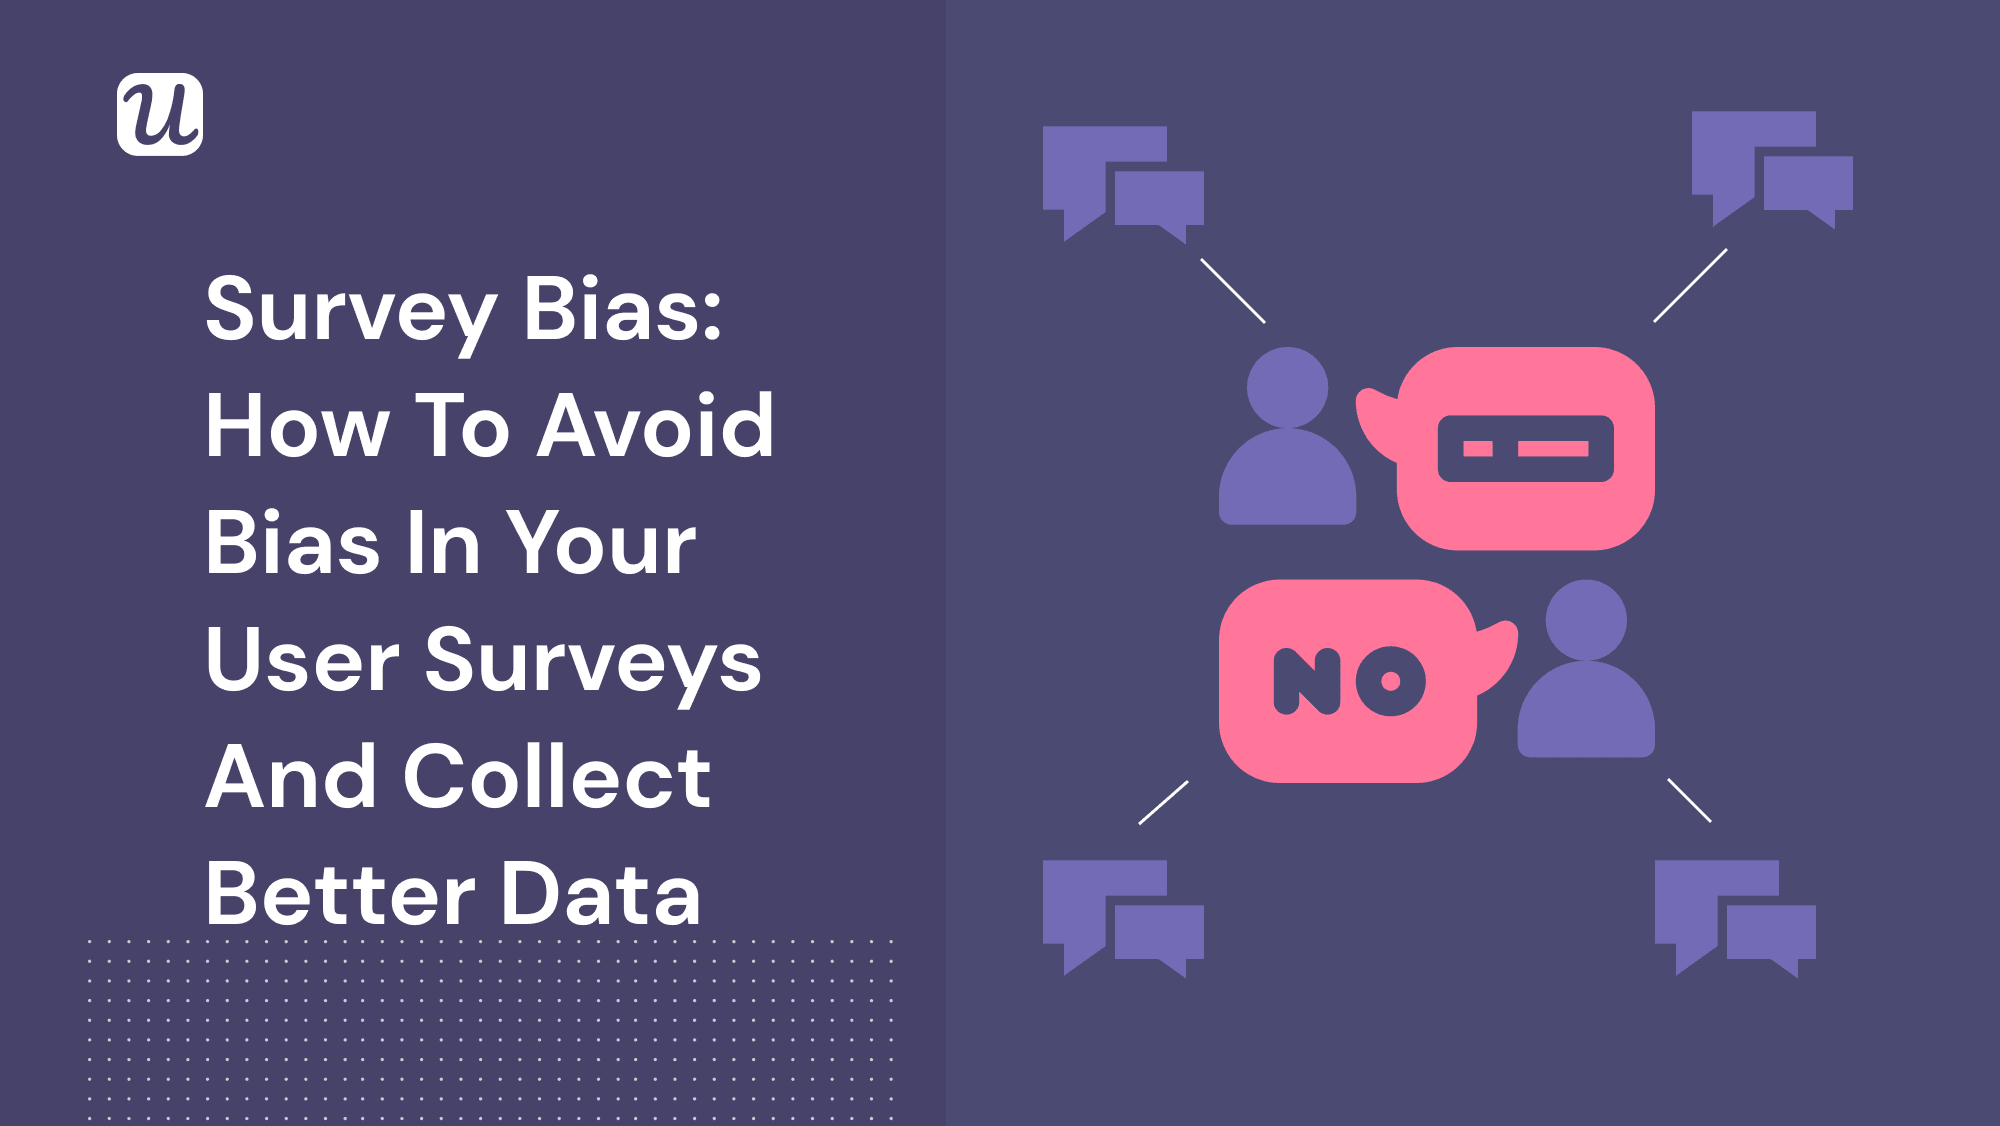 Survey Bias: How to Avoid Bias In Your User Surveys And Collect Better Data